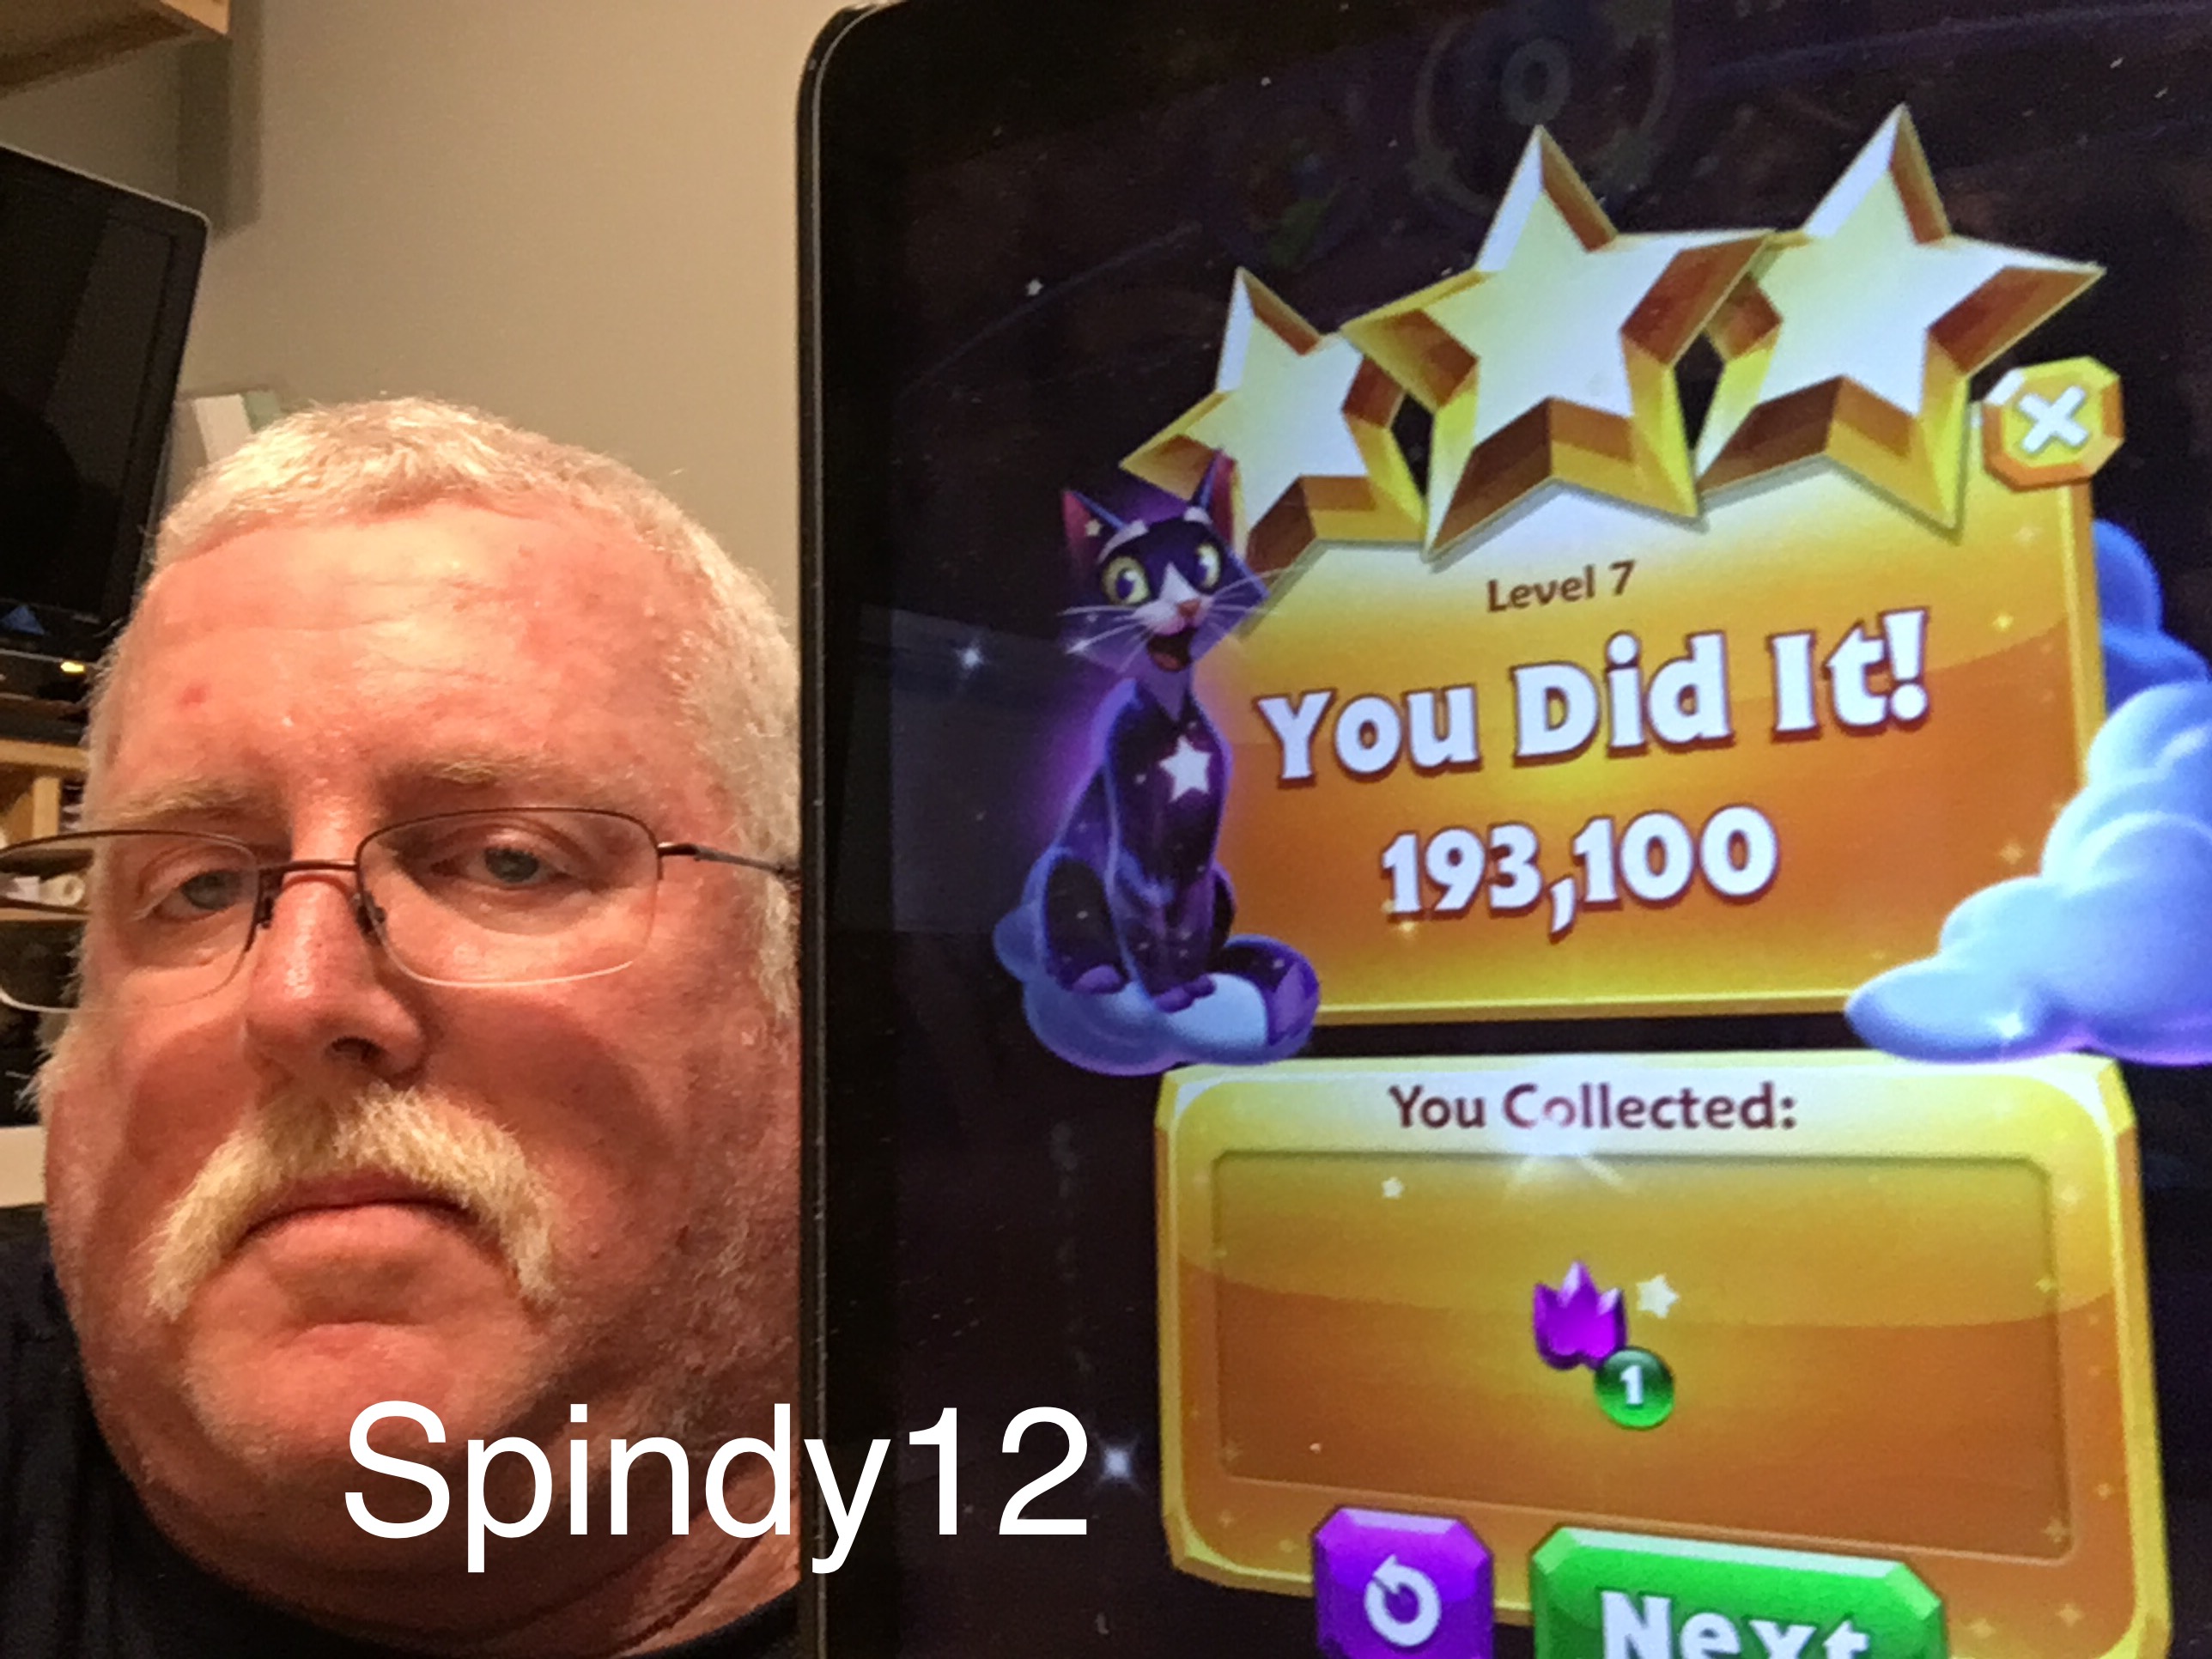 Spindy12: Bejeweled Stars: Level 7 - Ka-BOOM! (iOS) 193,100 points on 2016-12-25 07:36:07